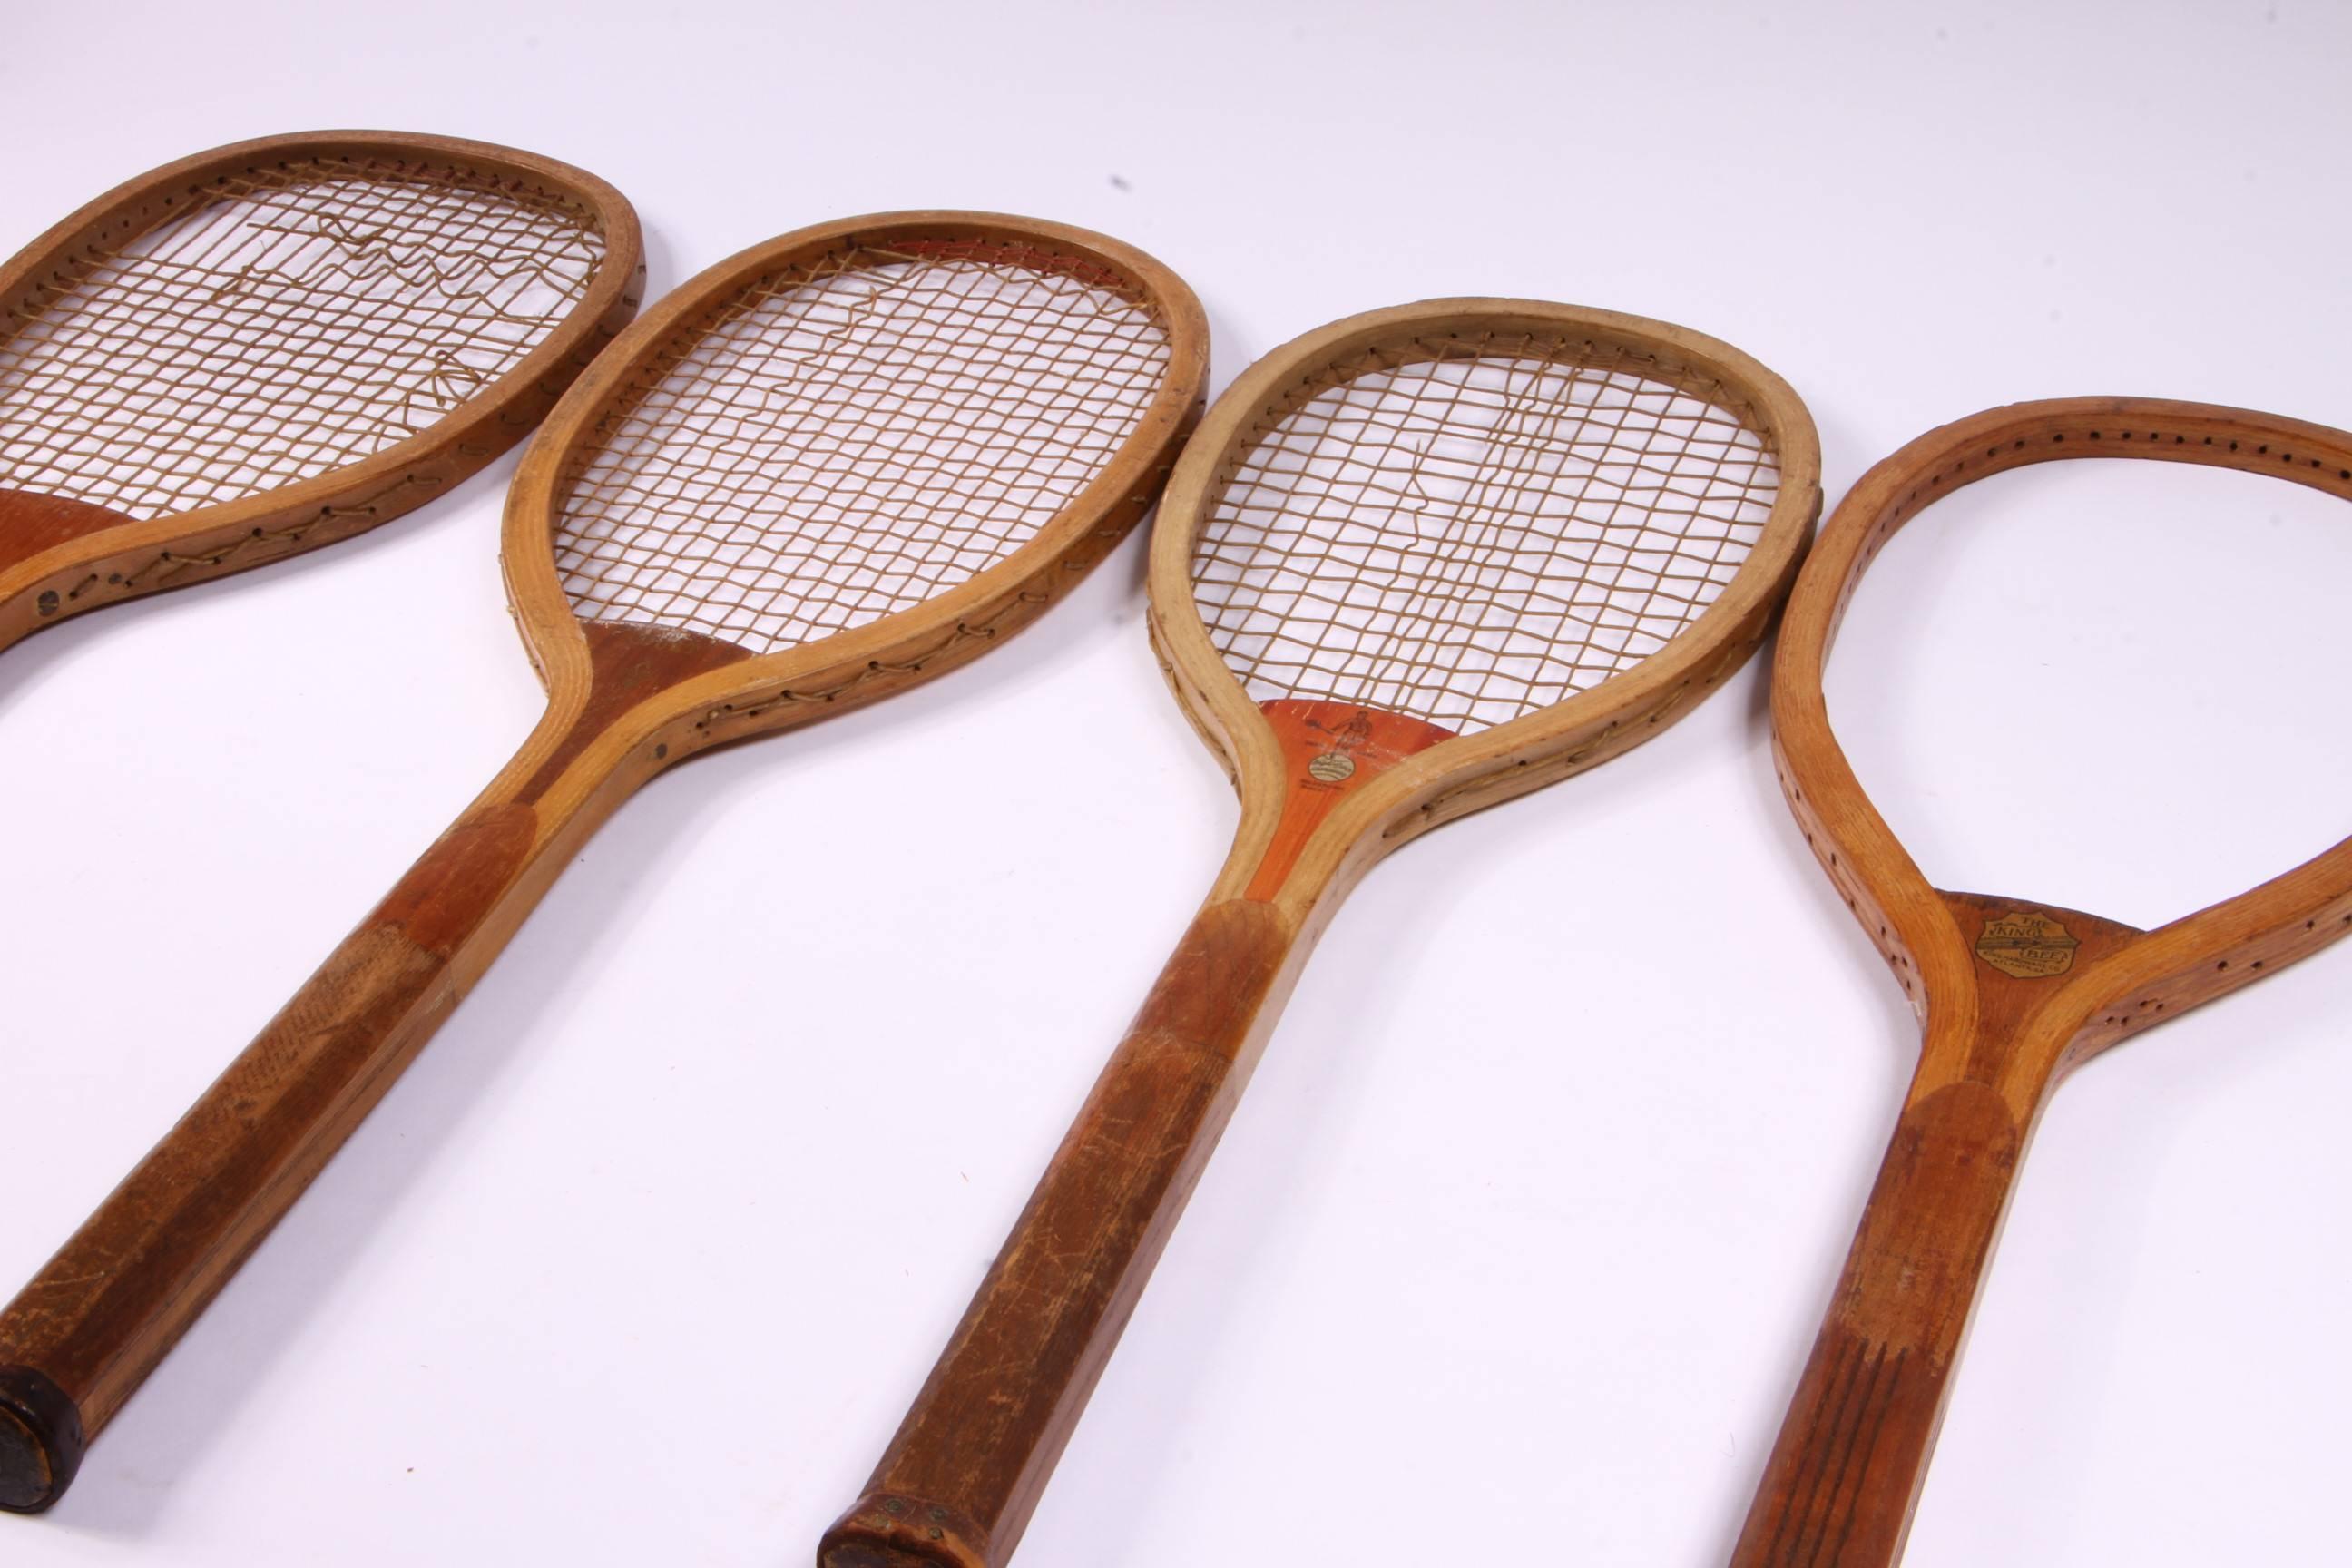 Wood Collection of 16 Vintage Tennis Rackets